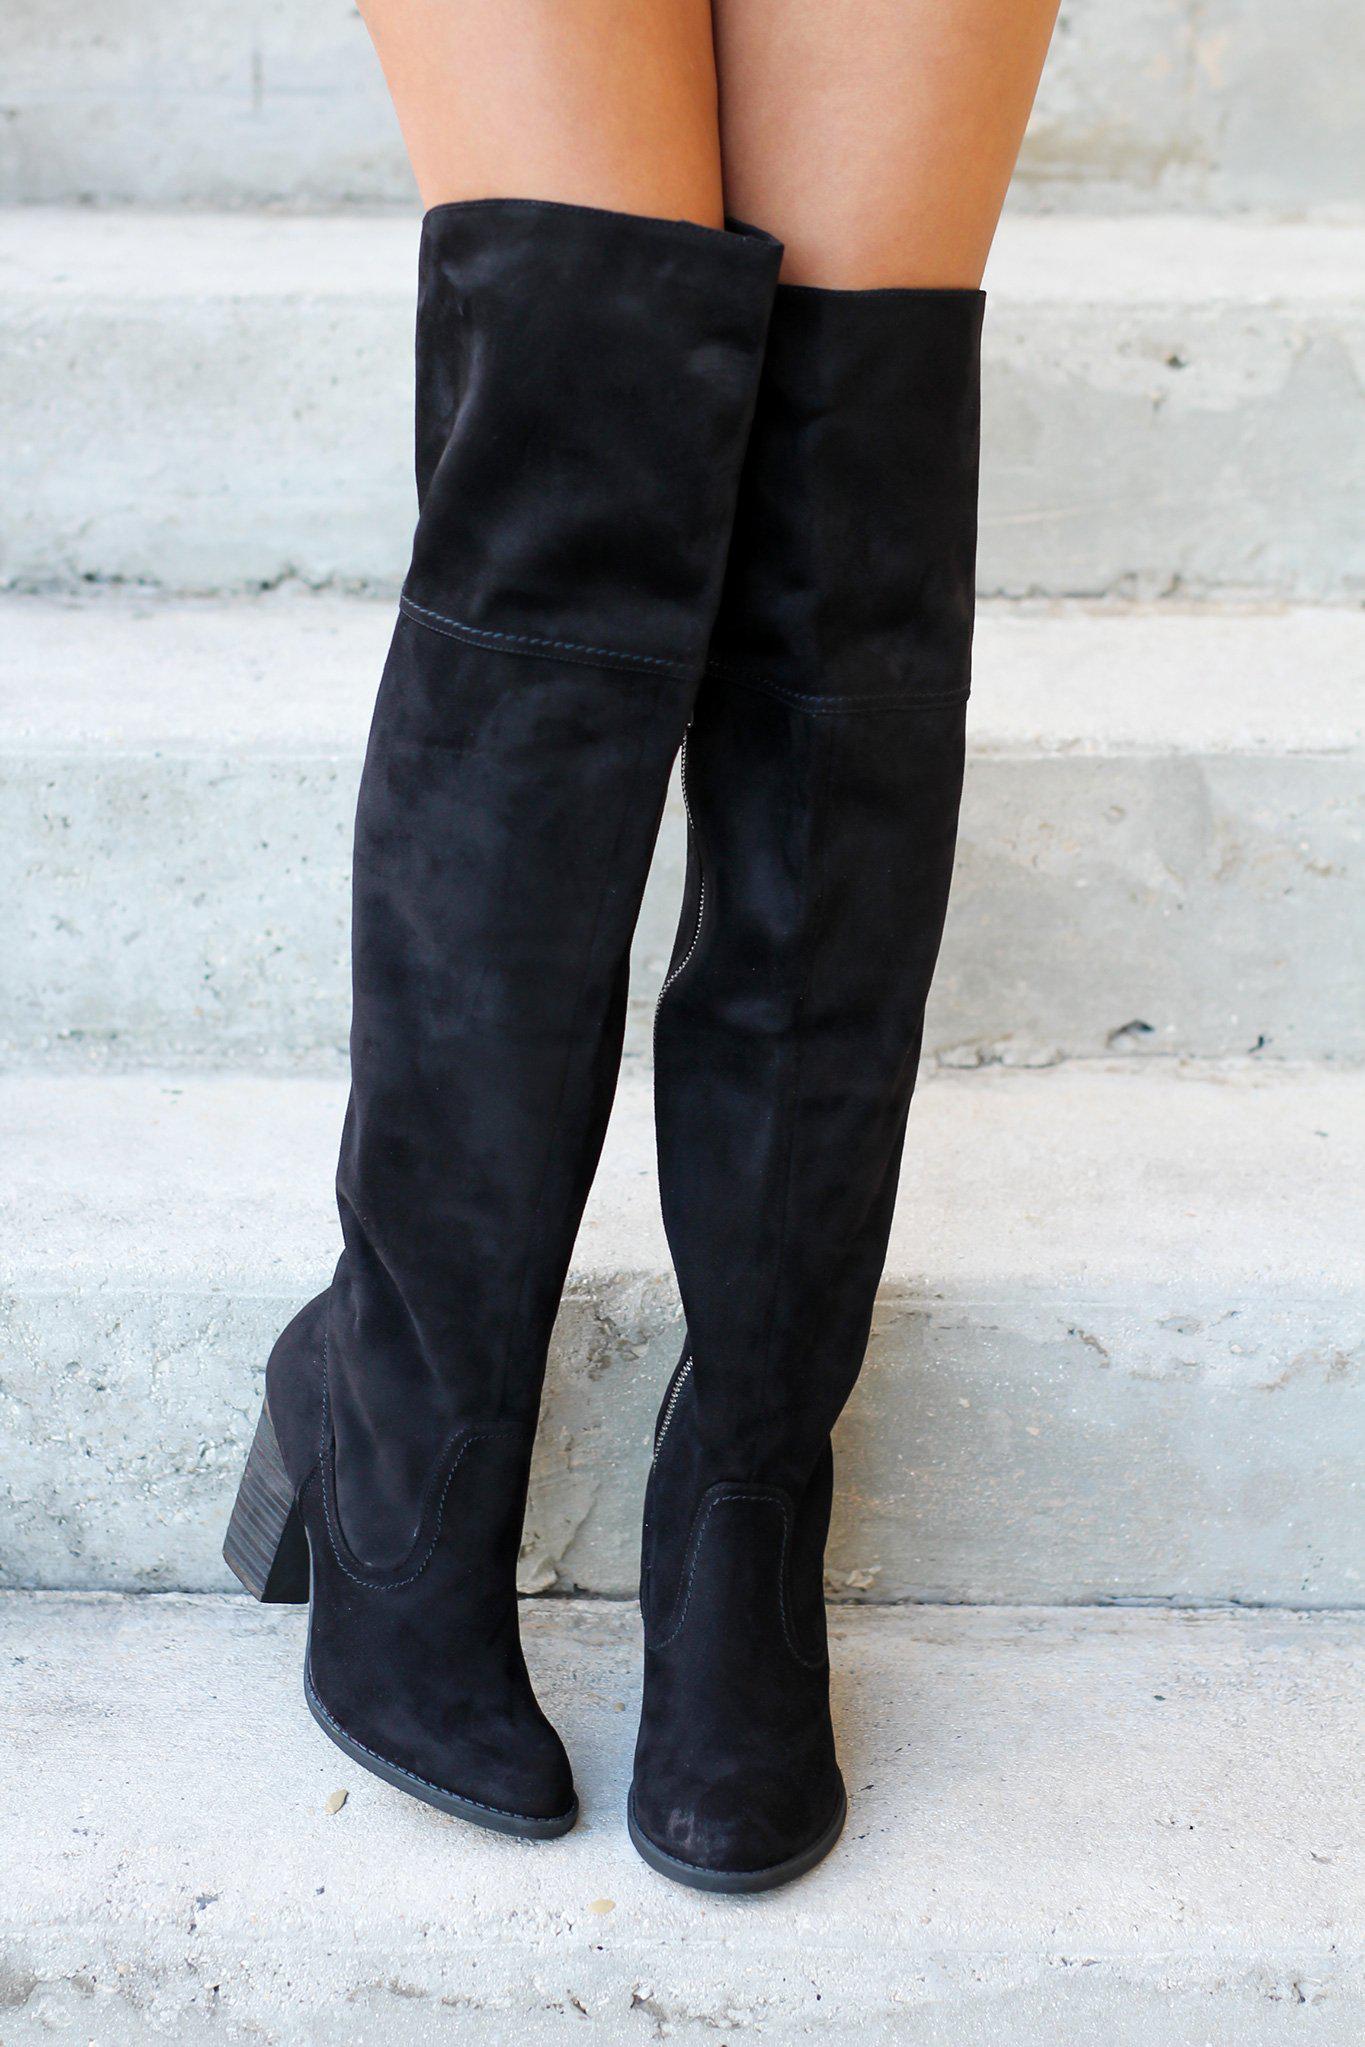 dress with black knee high boots